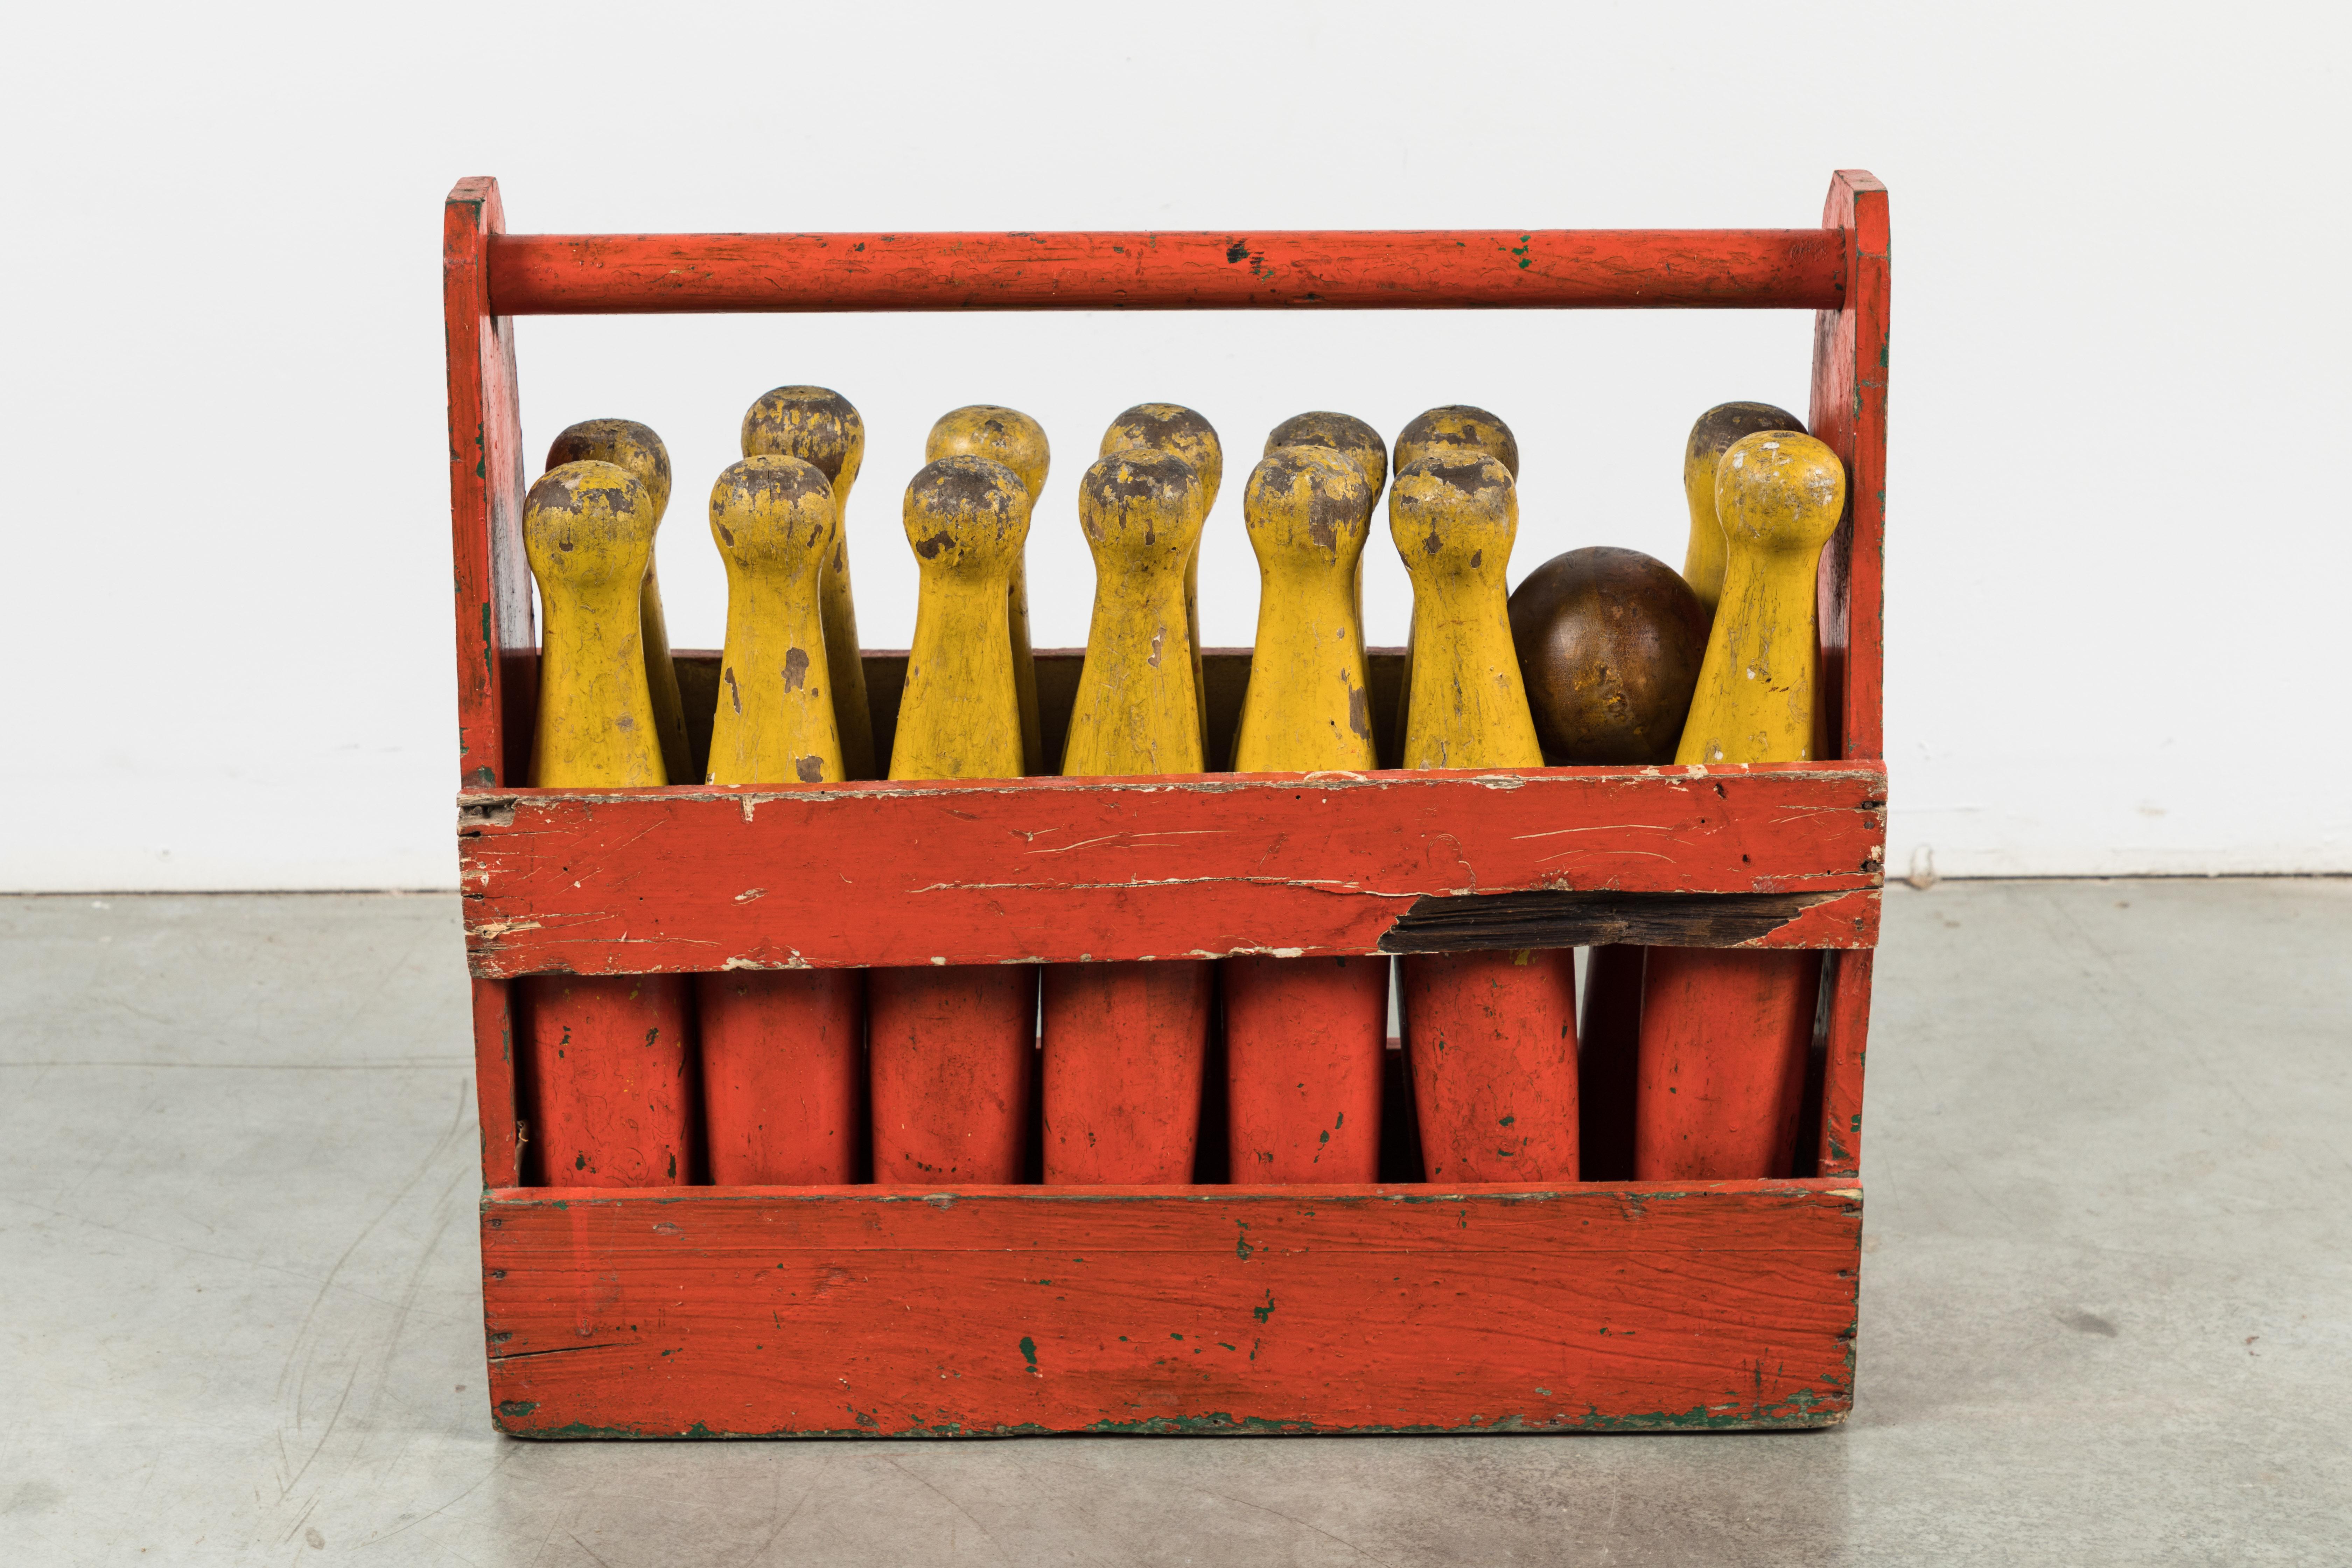 Lawn bowling set and caddy. The best orange and yellow paint. Great as a display or design accessory. Or play the game! Complete and as good as it gets. Includes 14 wood carved pins with original paint surface, two original natural surface game